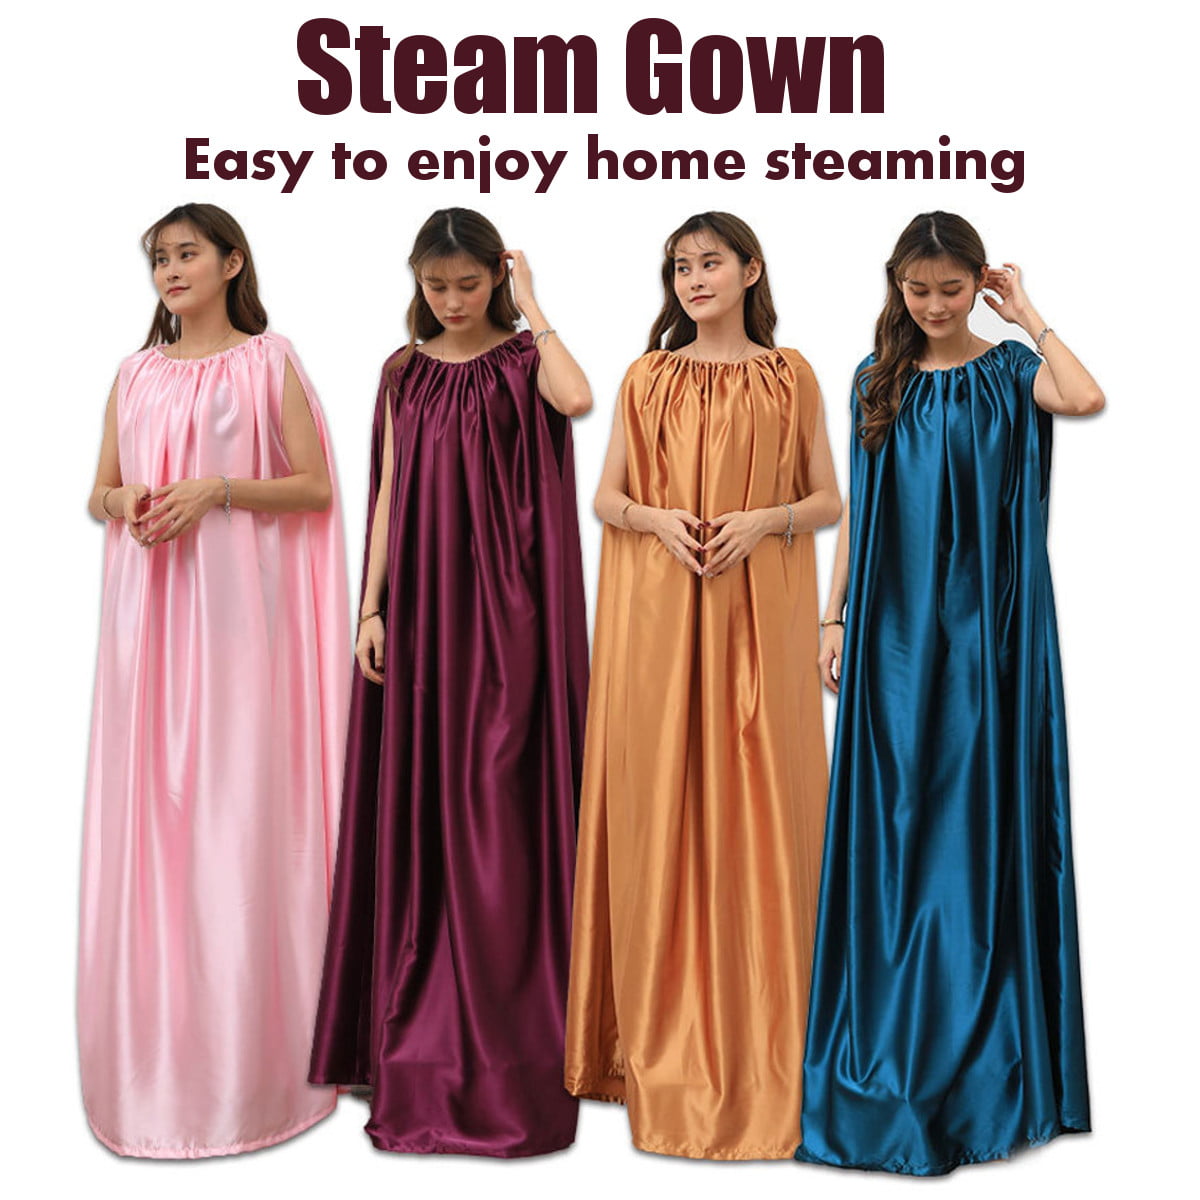 Yoni  V-Steam GownRobe Full Body Cover Varies Colors